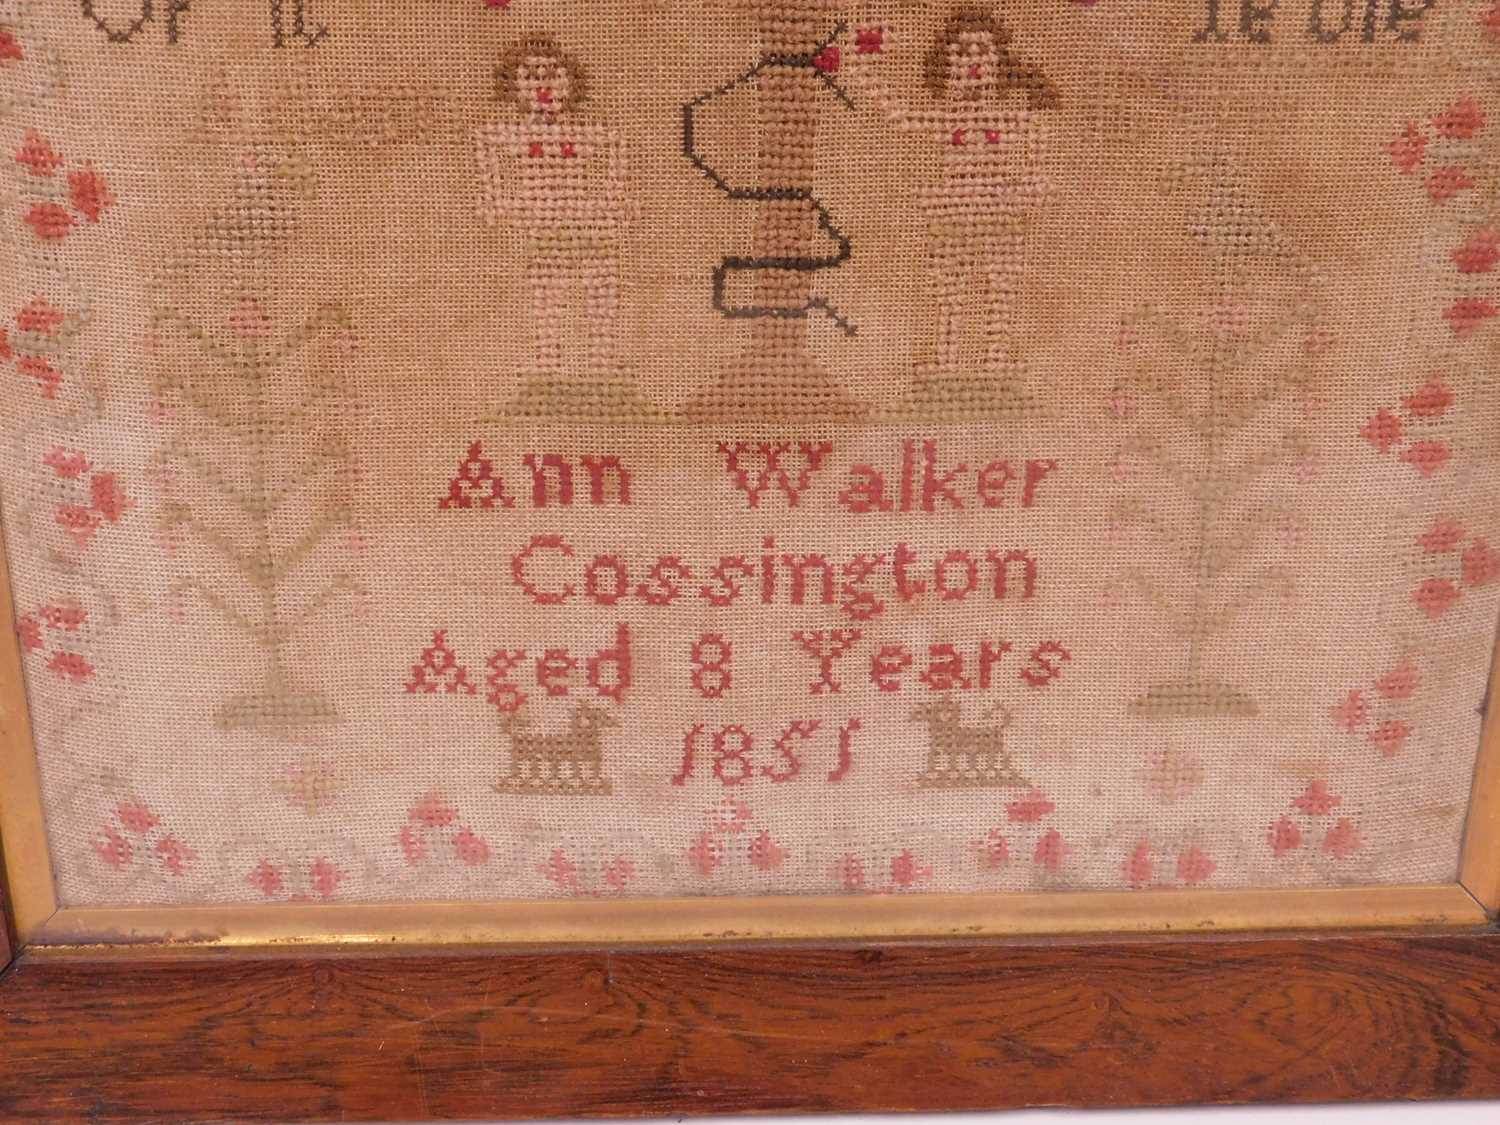 A mid 19th Century needlework sampler with alpha numeric stitching, religious text and Adam & Eve in - Image 3 of 3